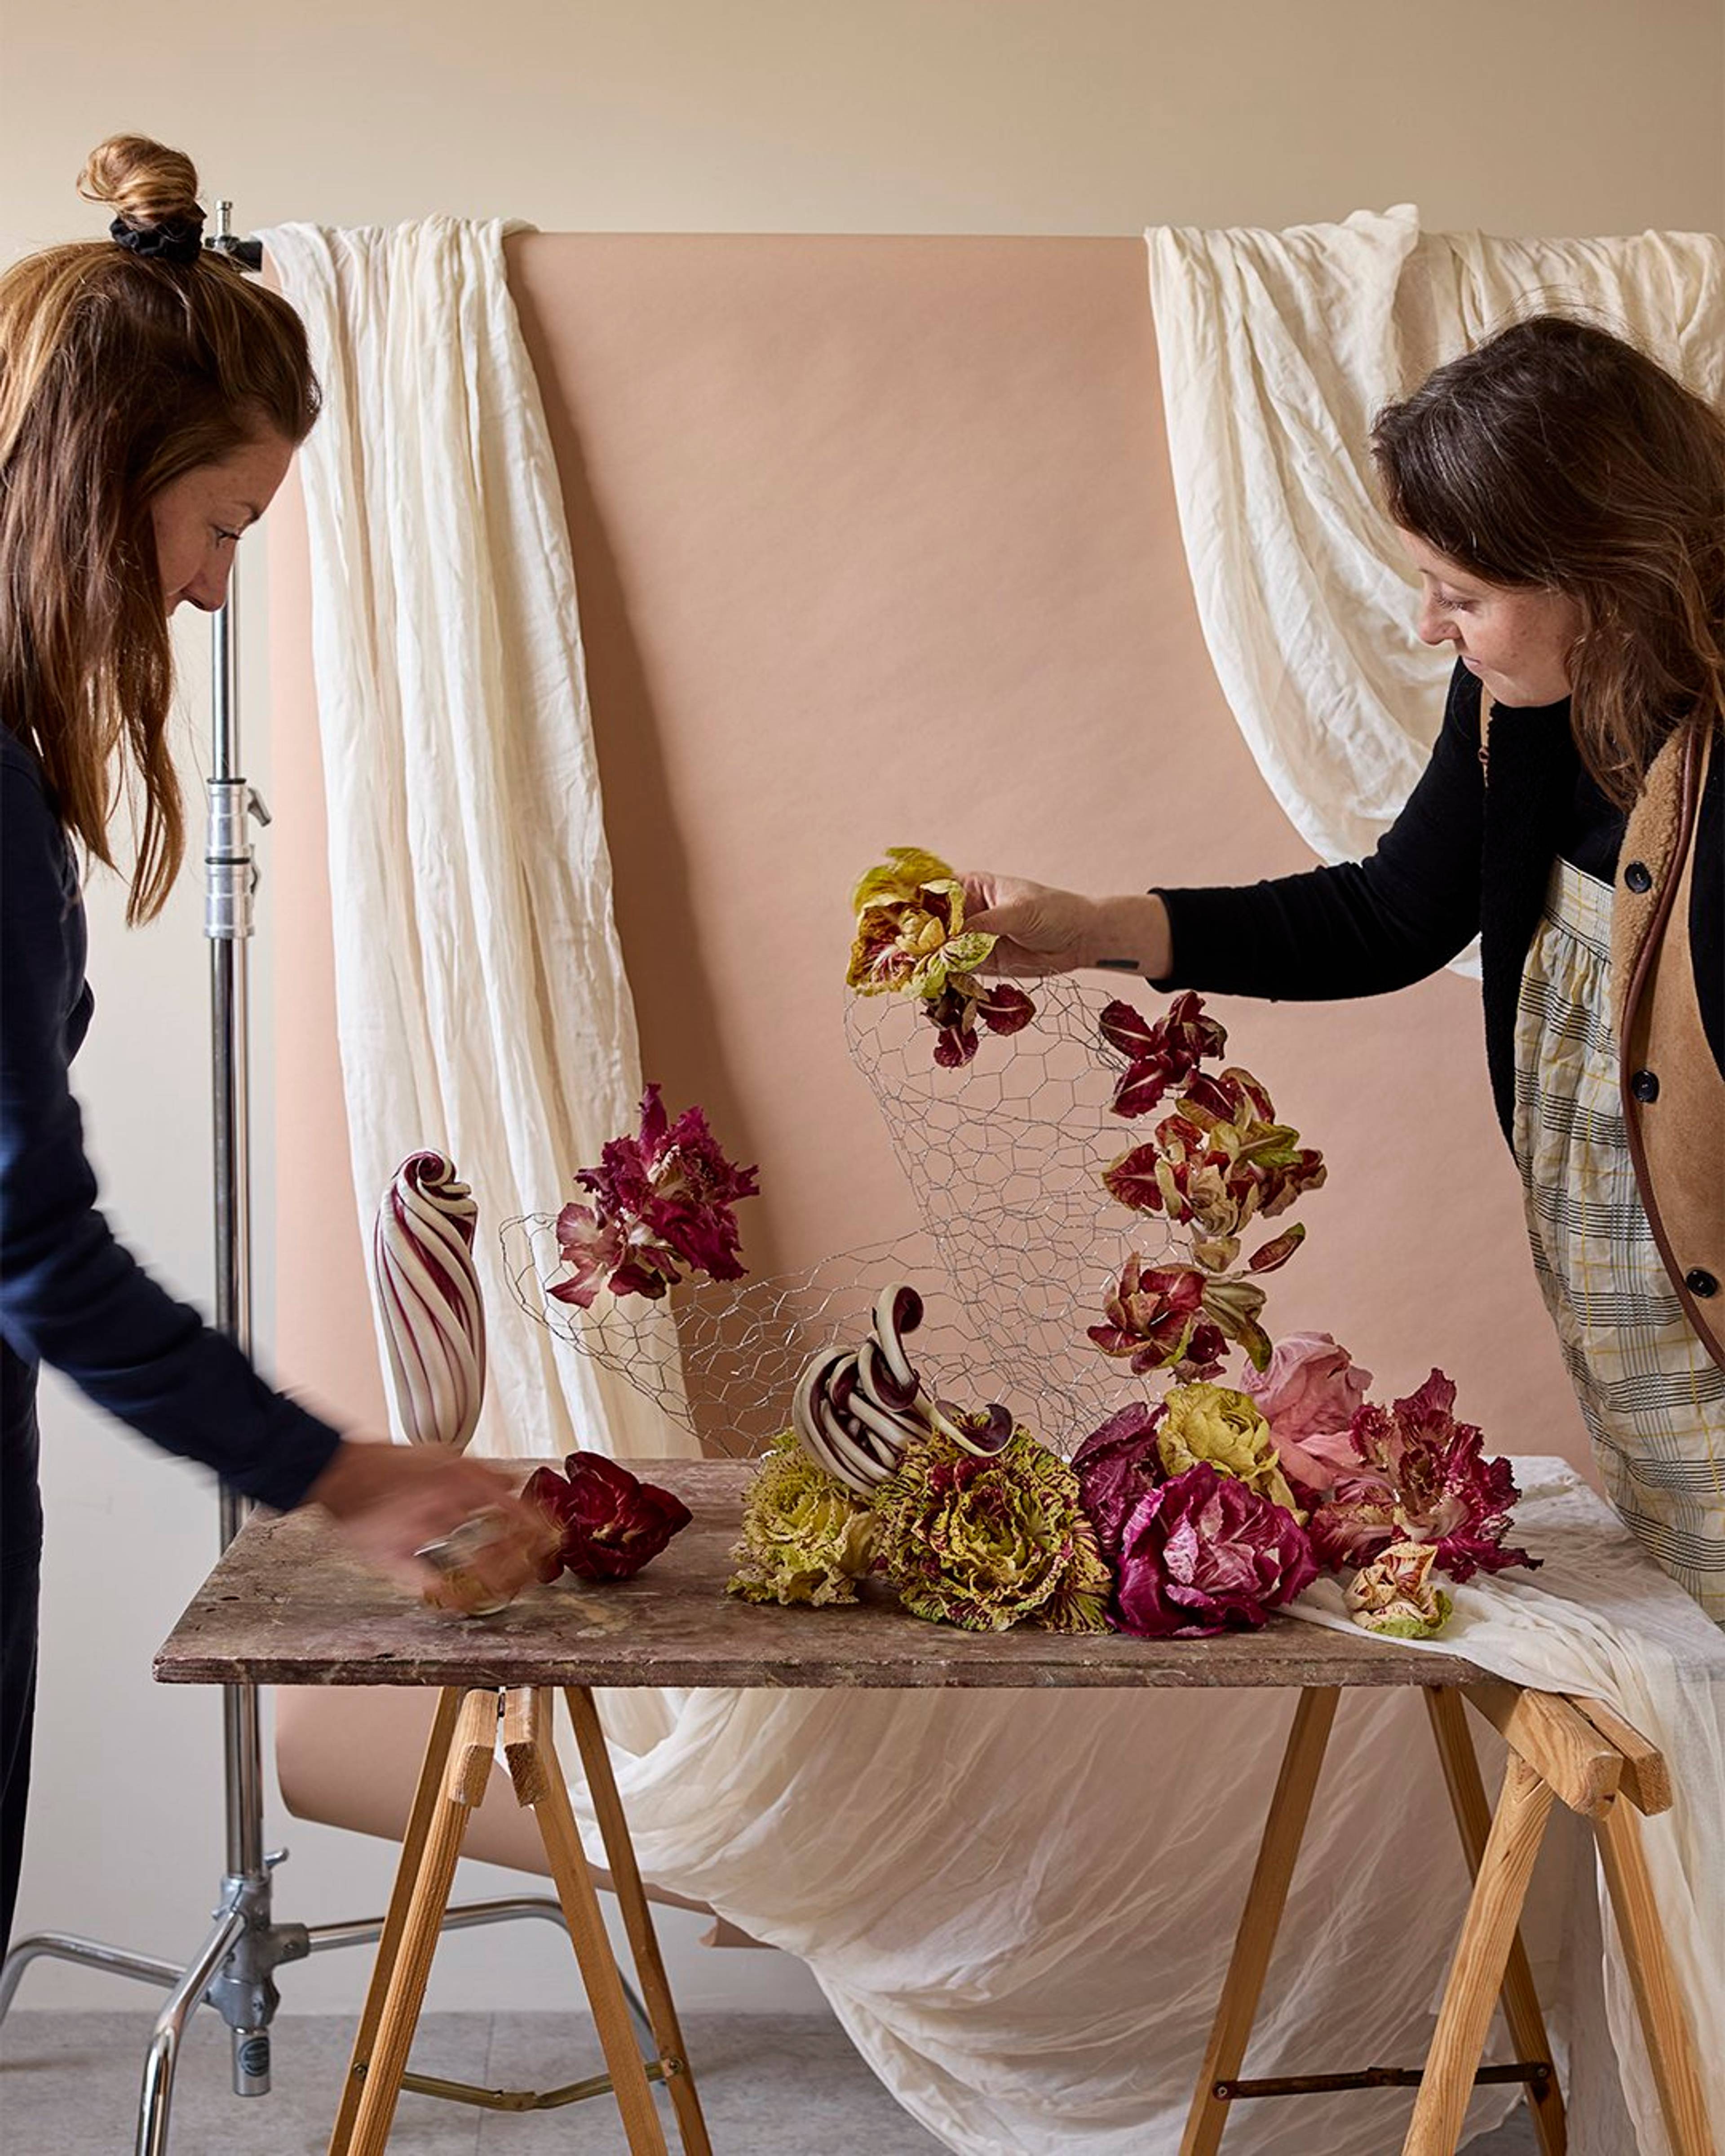 Two women from ssaw collective designing a table display with radicchio